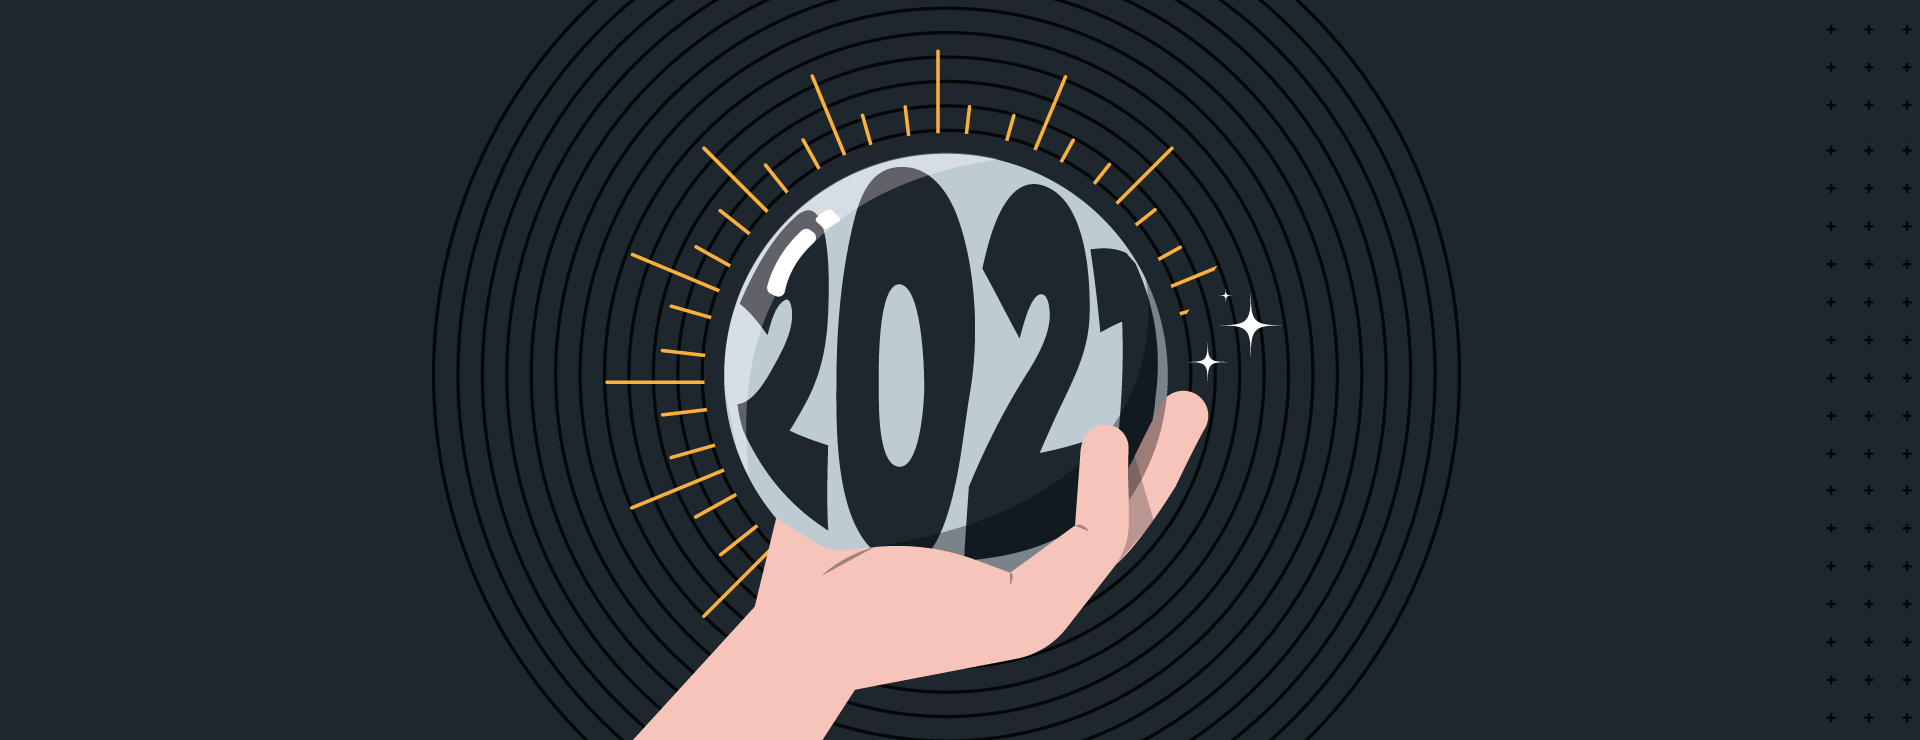 Automation Predictions For 2021 Blog Banner 1